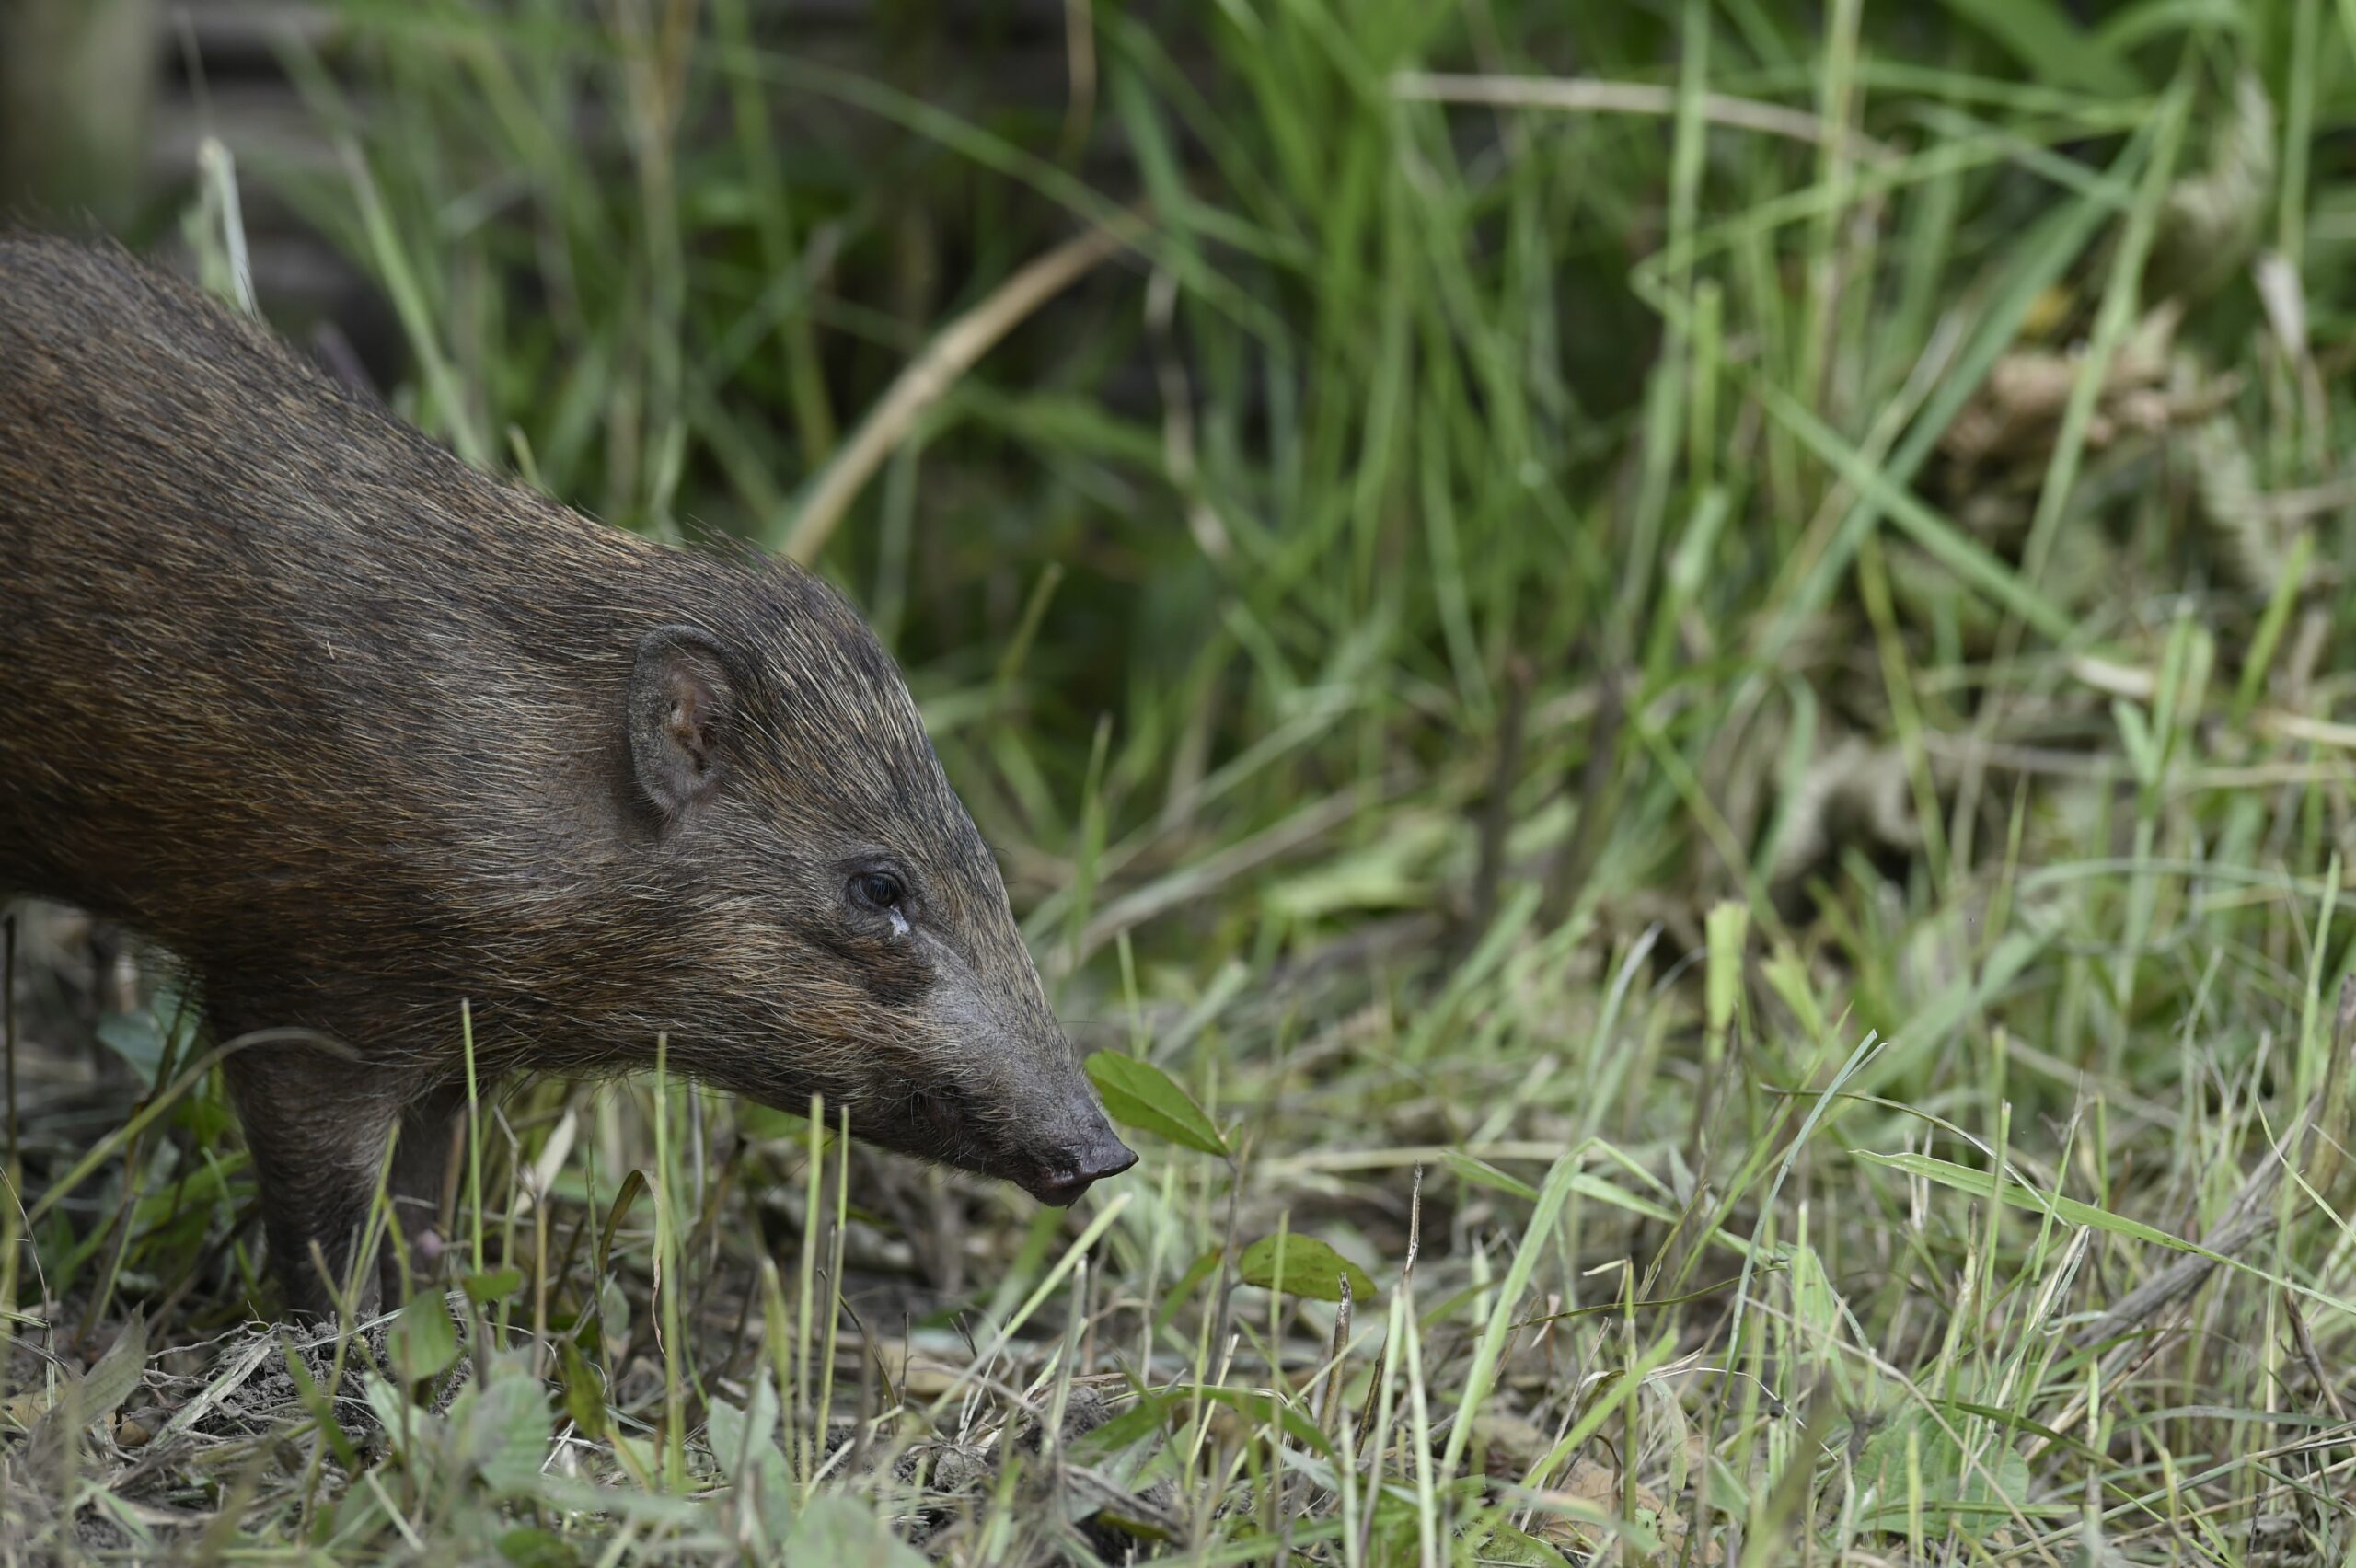 A Pygmy Hog in its natural habitat released by members of Pygmy Hog Conservation Programme and Durrel Wildlife Conservation Trust at Bornadi Wildlife Sanctuary.